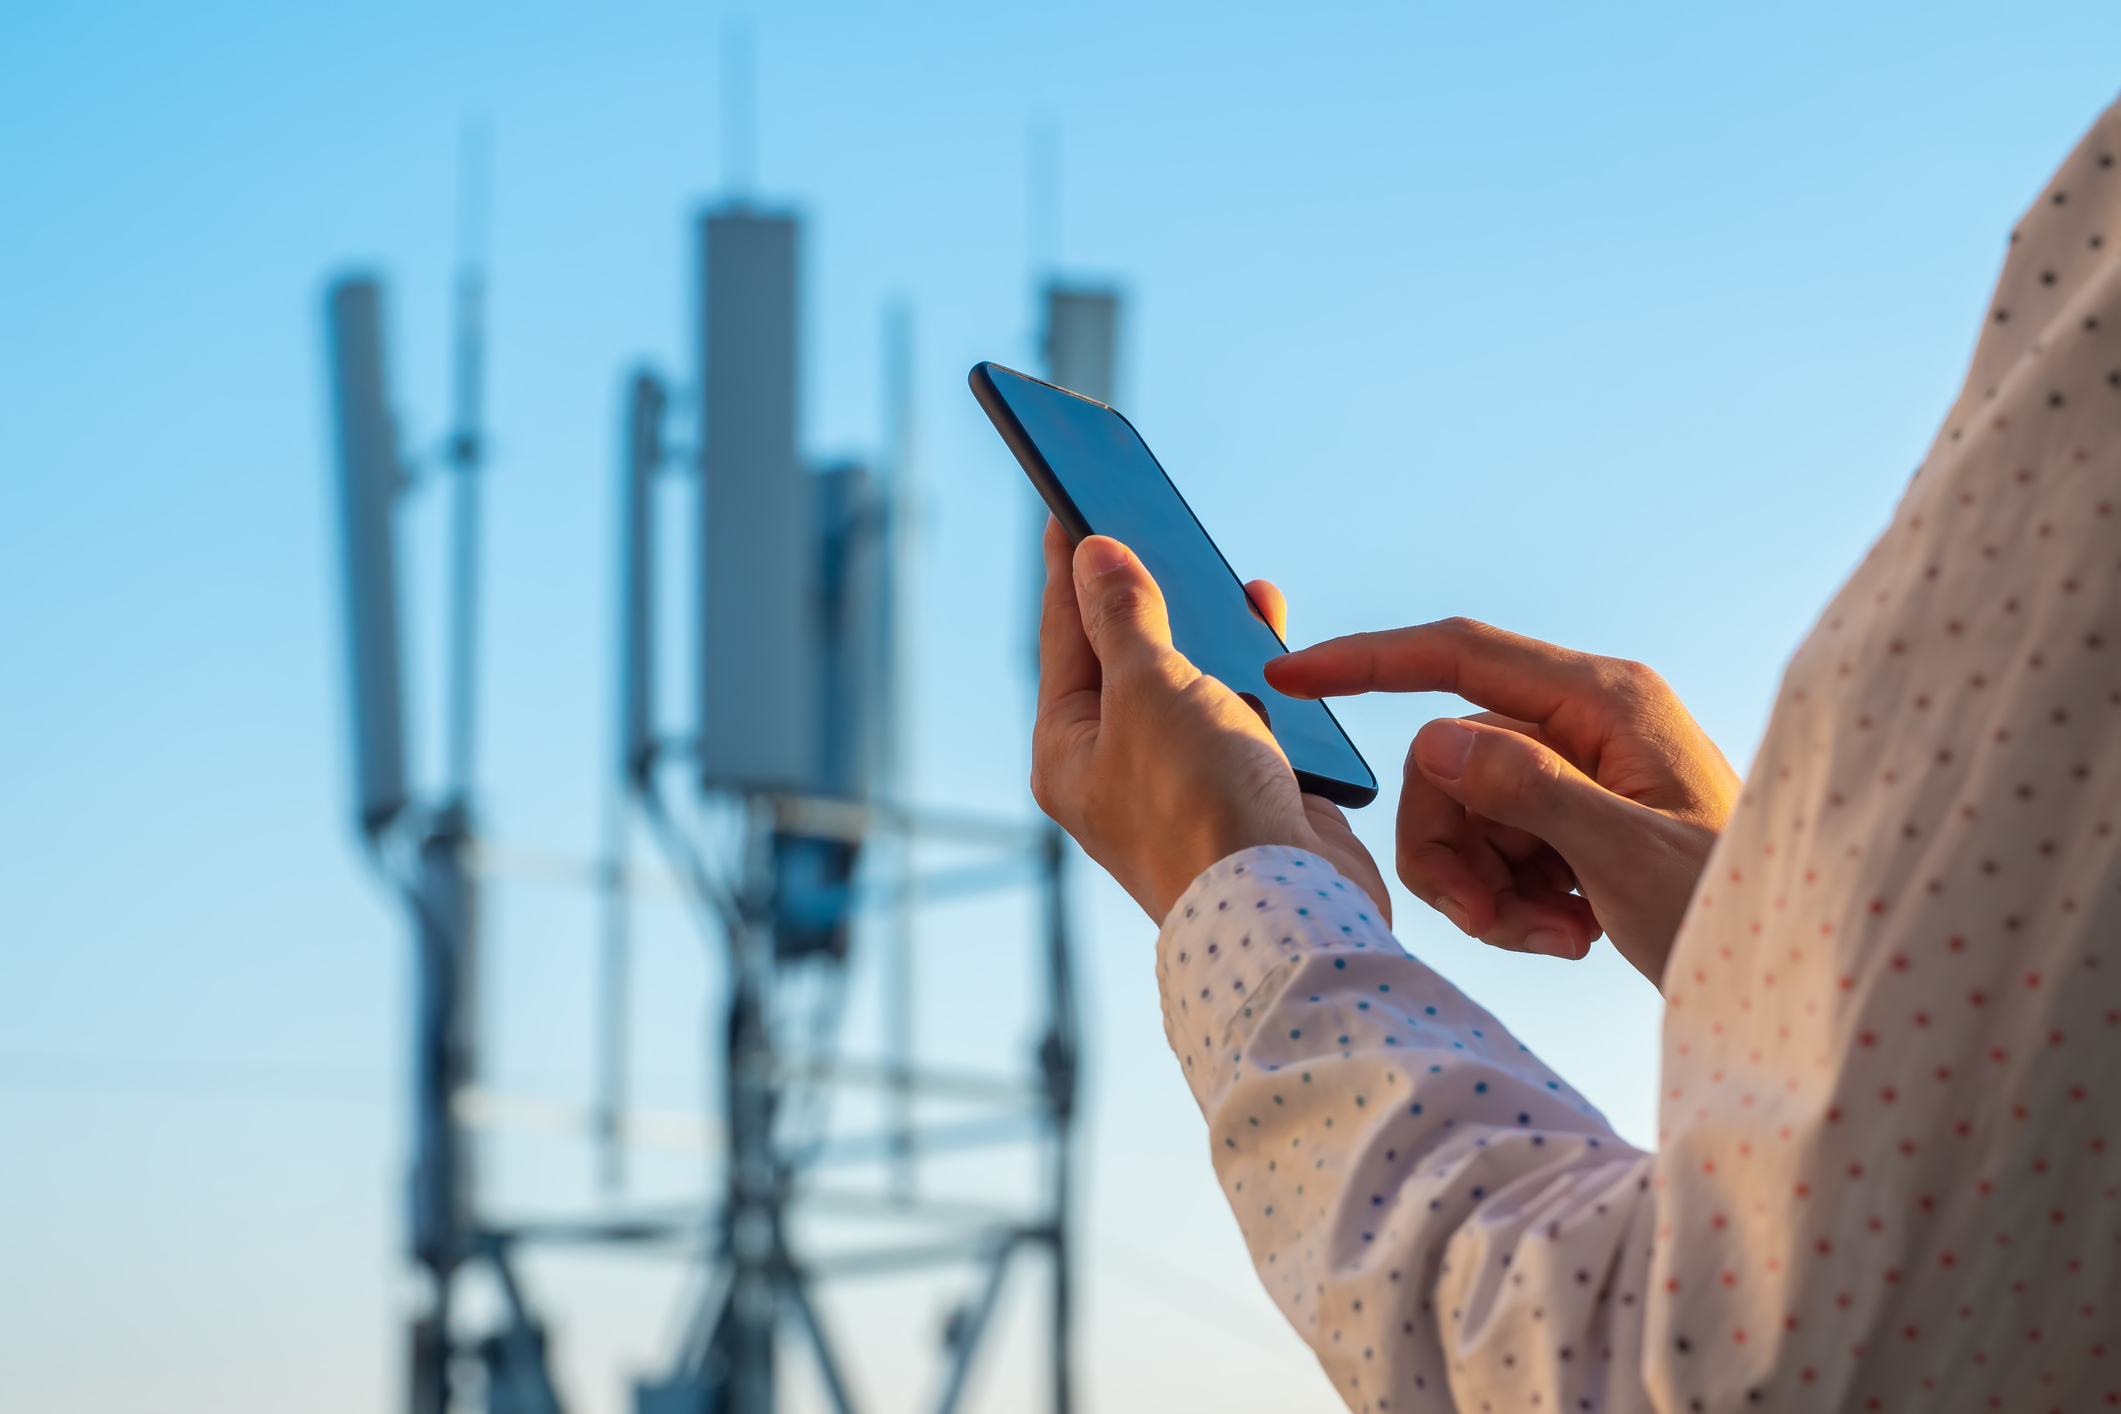 Hamptons cell service may require unsightly cell towers